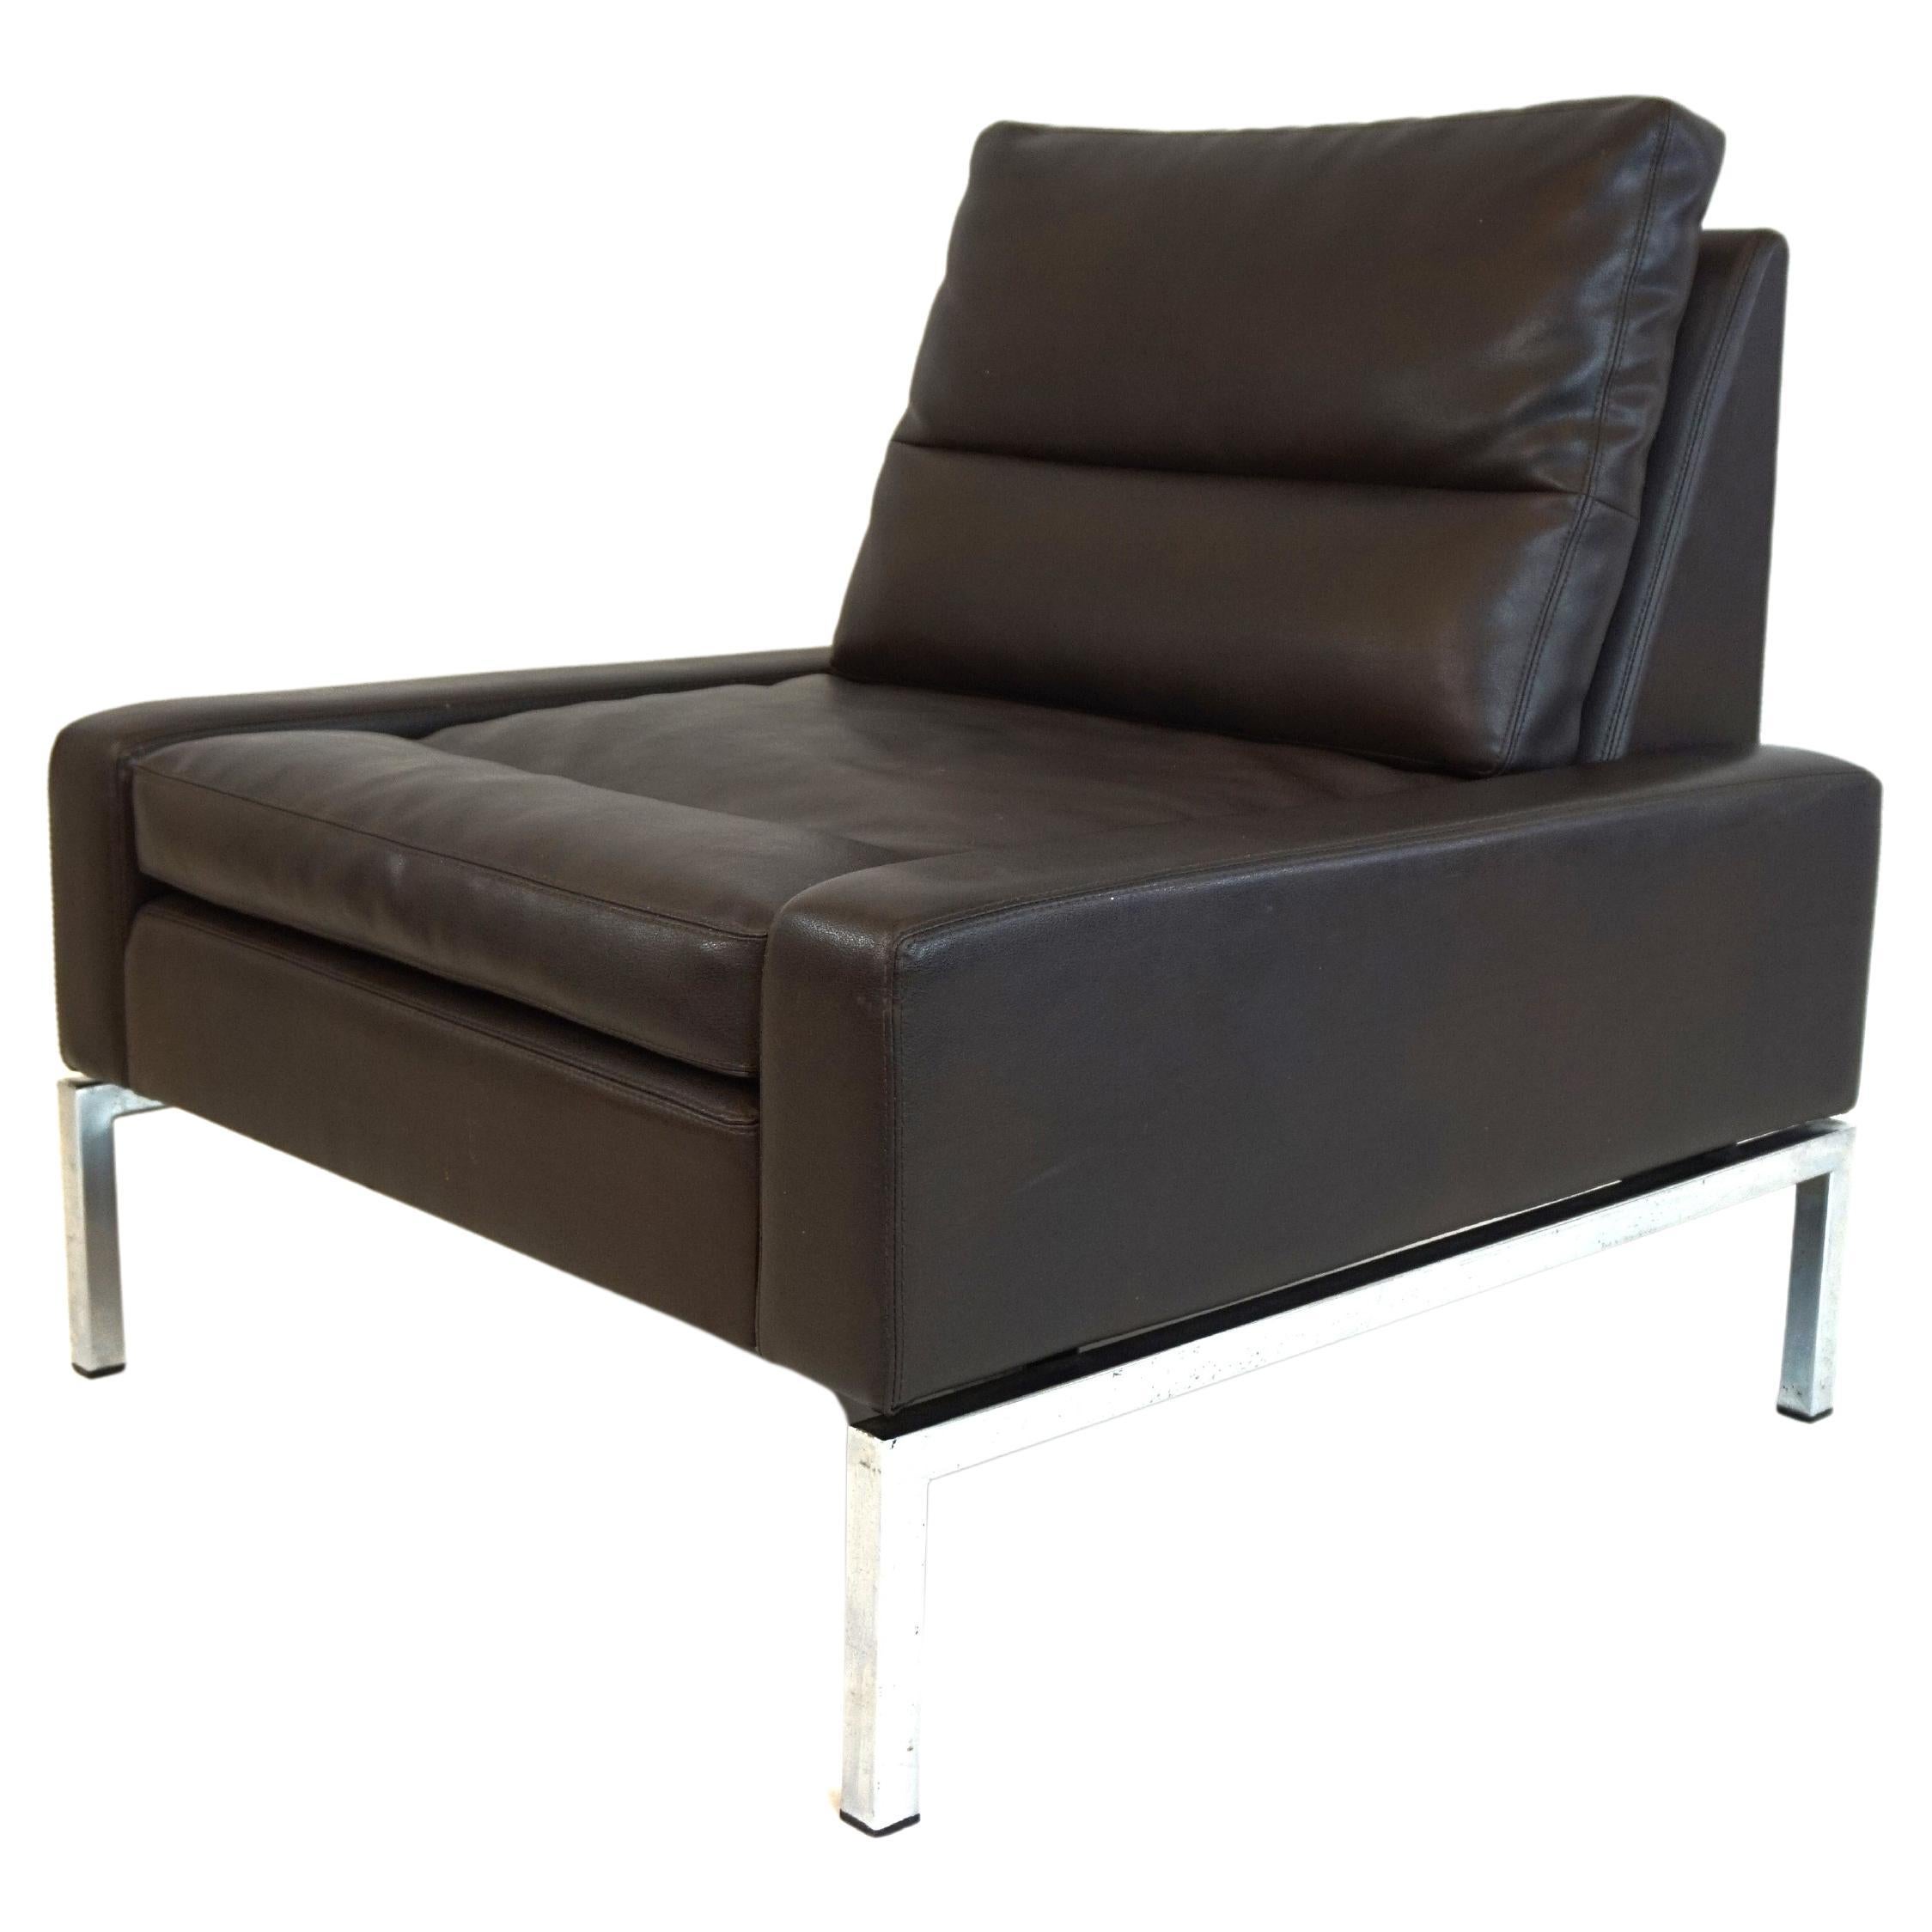 Wilkhahn Series 800 leather armchair by Hans Peter Piel For Sale